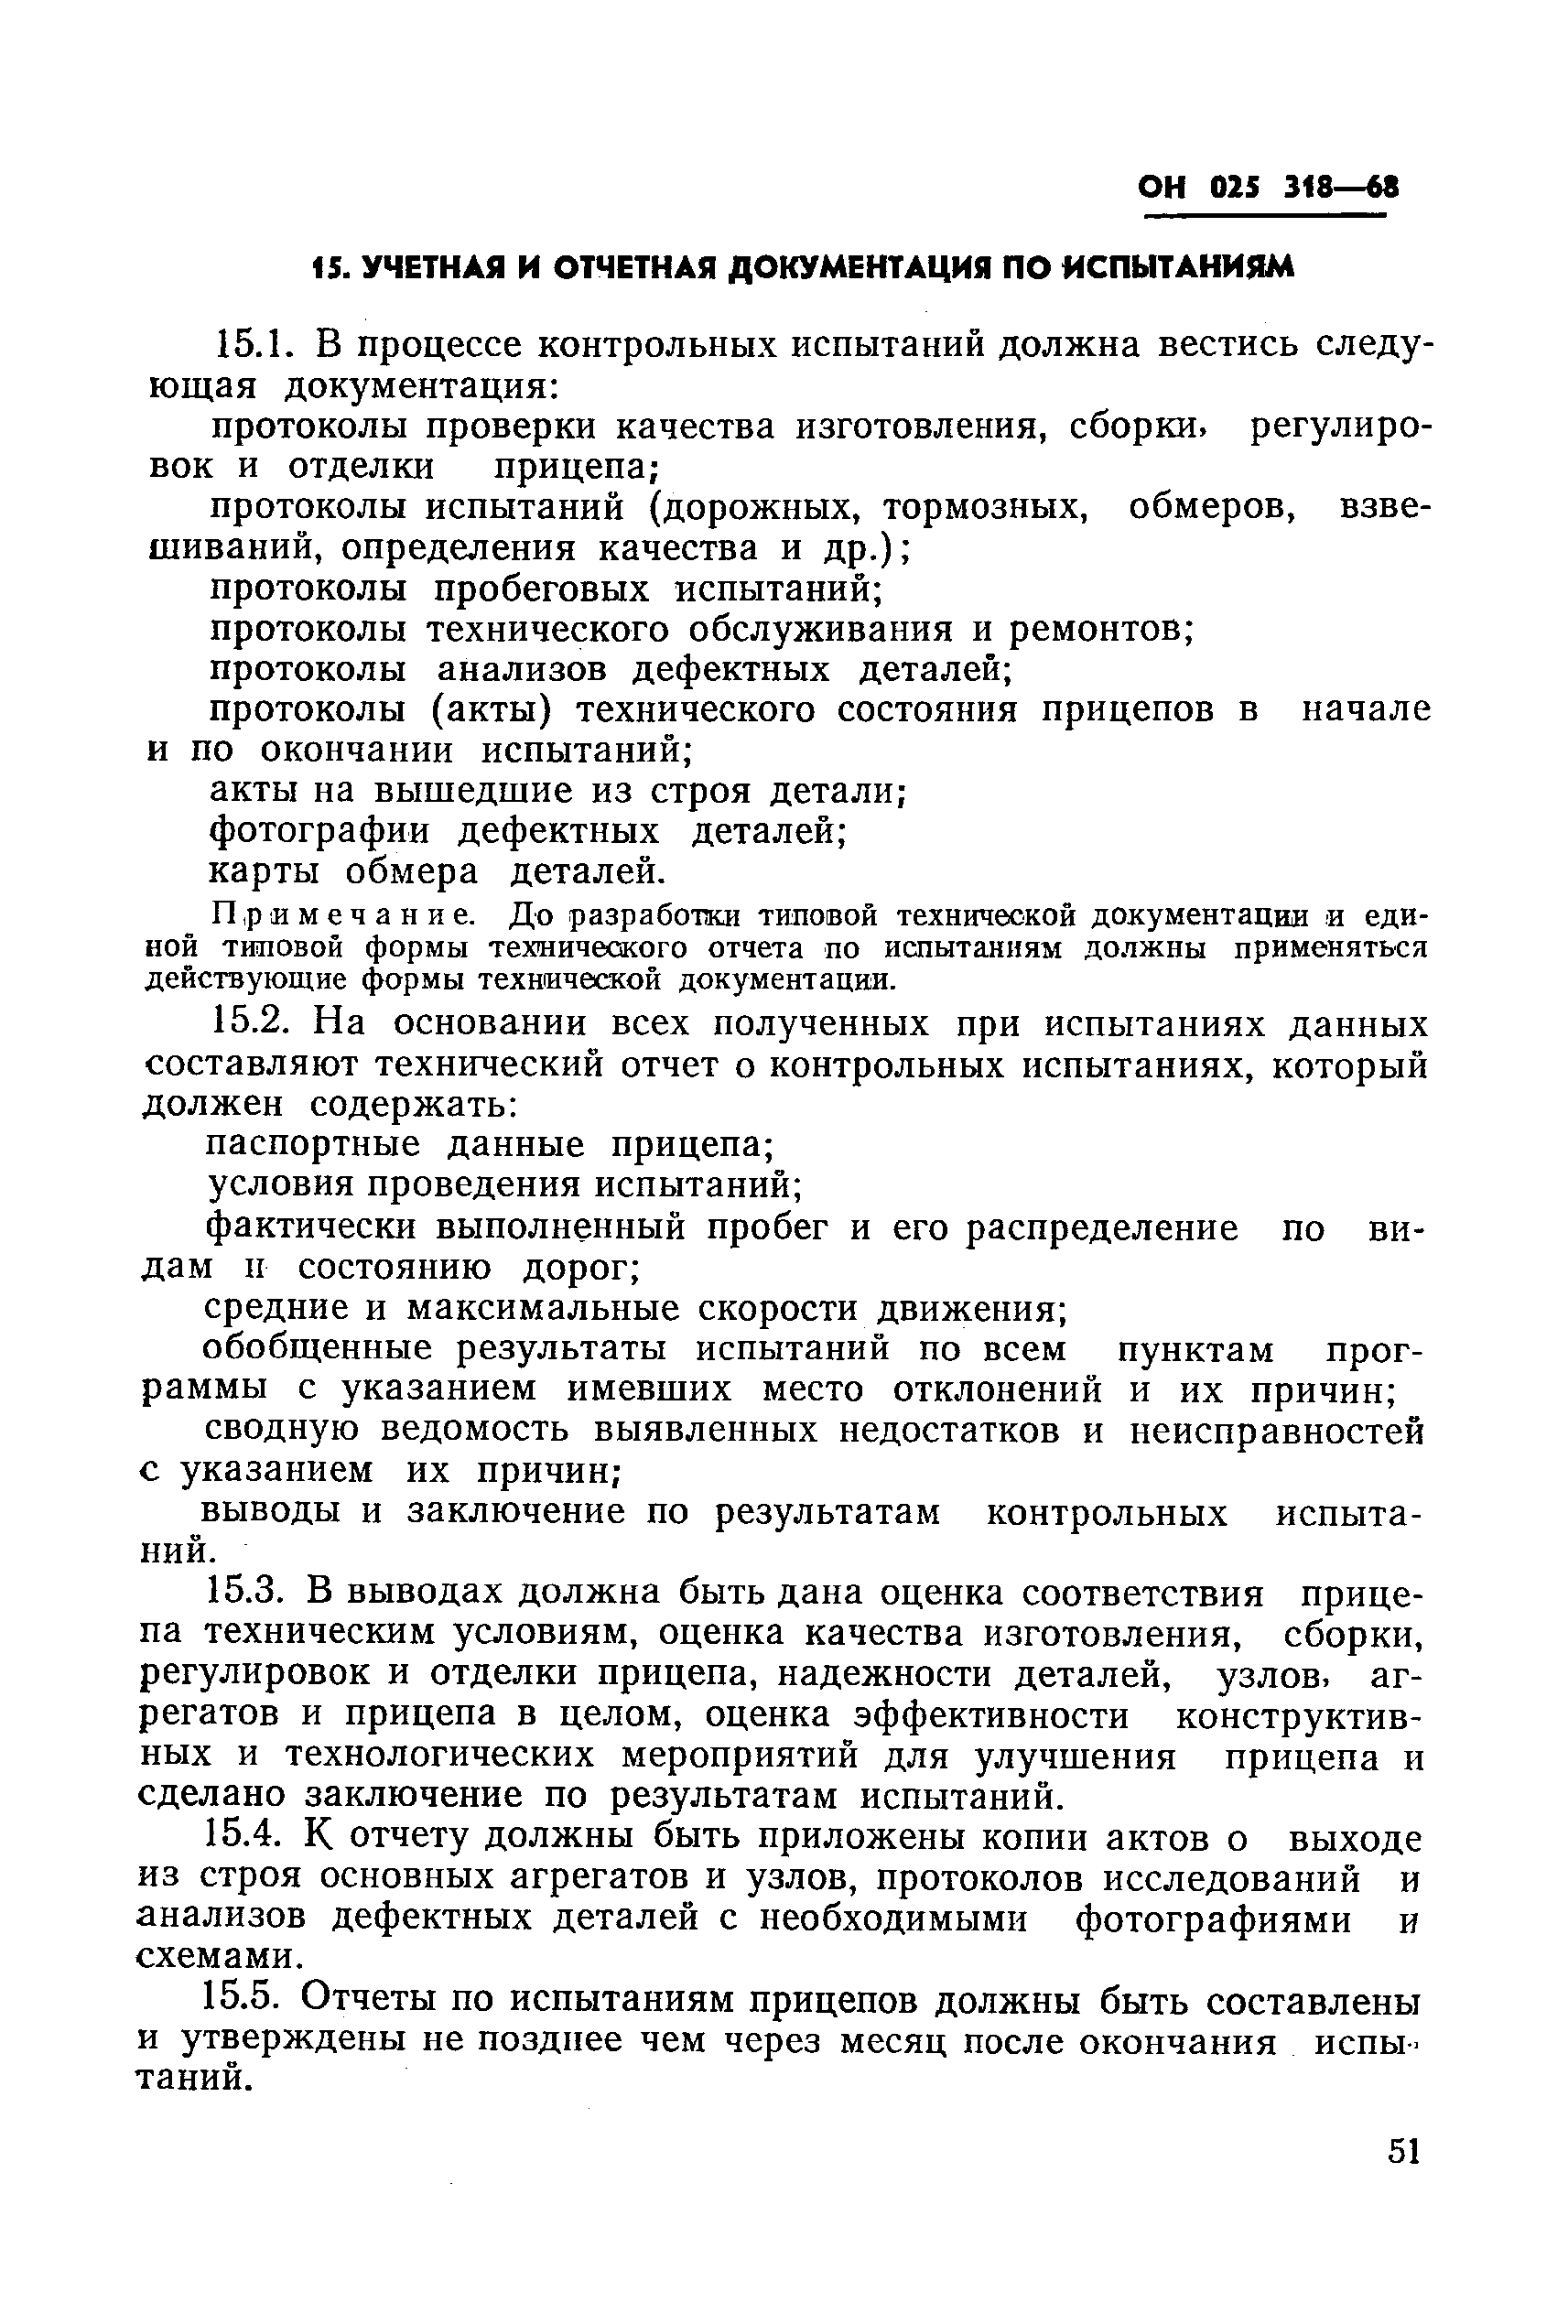 ОН 025 318-68